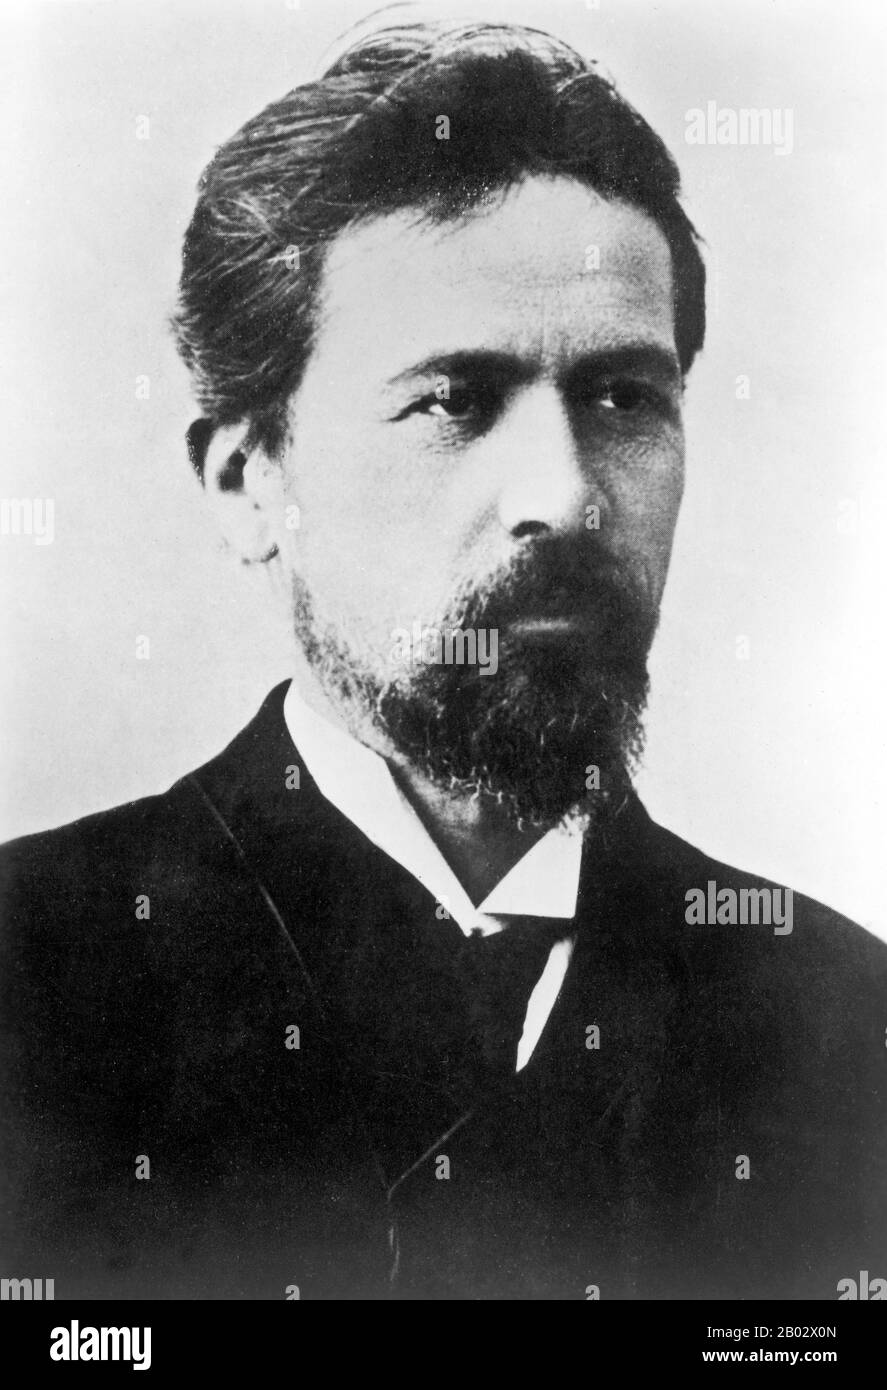 Anton Pavlovich Chekhov (29 January 1860 – 15 July 1904) was a Russian physician, playwright and author who is considered to be among the greatest writers of short stories in history. His career as a playwright produced four classics and his best short stories are held in high esteem by writers and critics.  Chekhov practiced as a medical doctor throughout most of his literary career: 'Medicine is my lawful wife', he once said, 'and literature is my mistress'. Along with Henrik Ibsen and August Strindberg, Chekhov is often referred to as one of the three seminal figures in the birth of early m Stock Photo